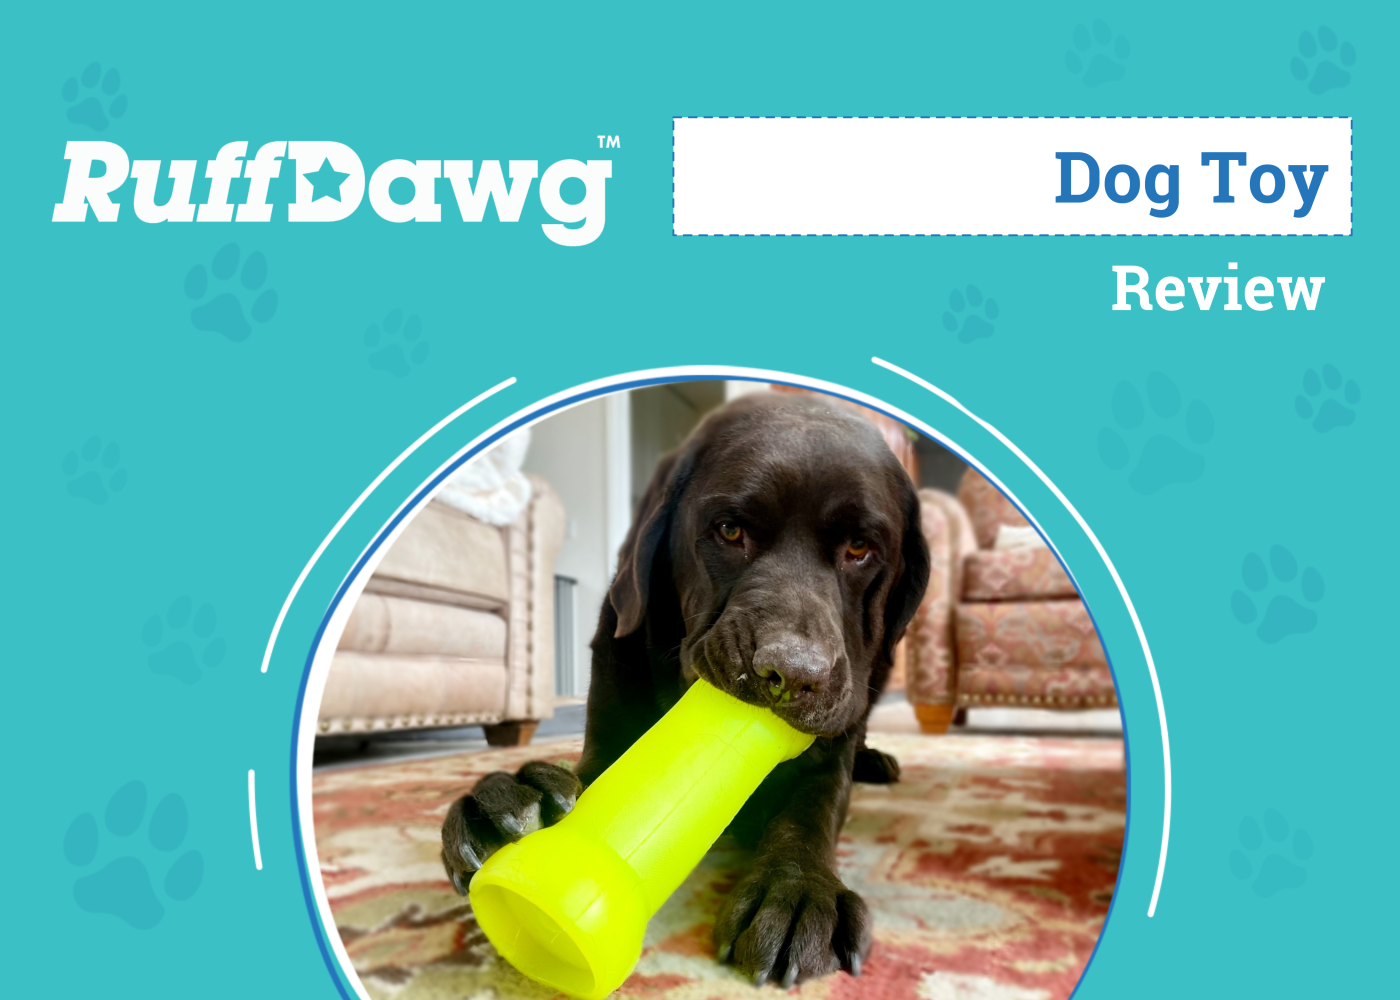 Ruff Dawg Toy Review by Dogster.com